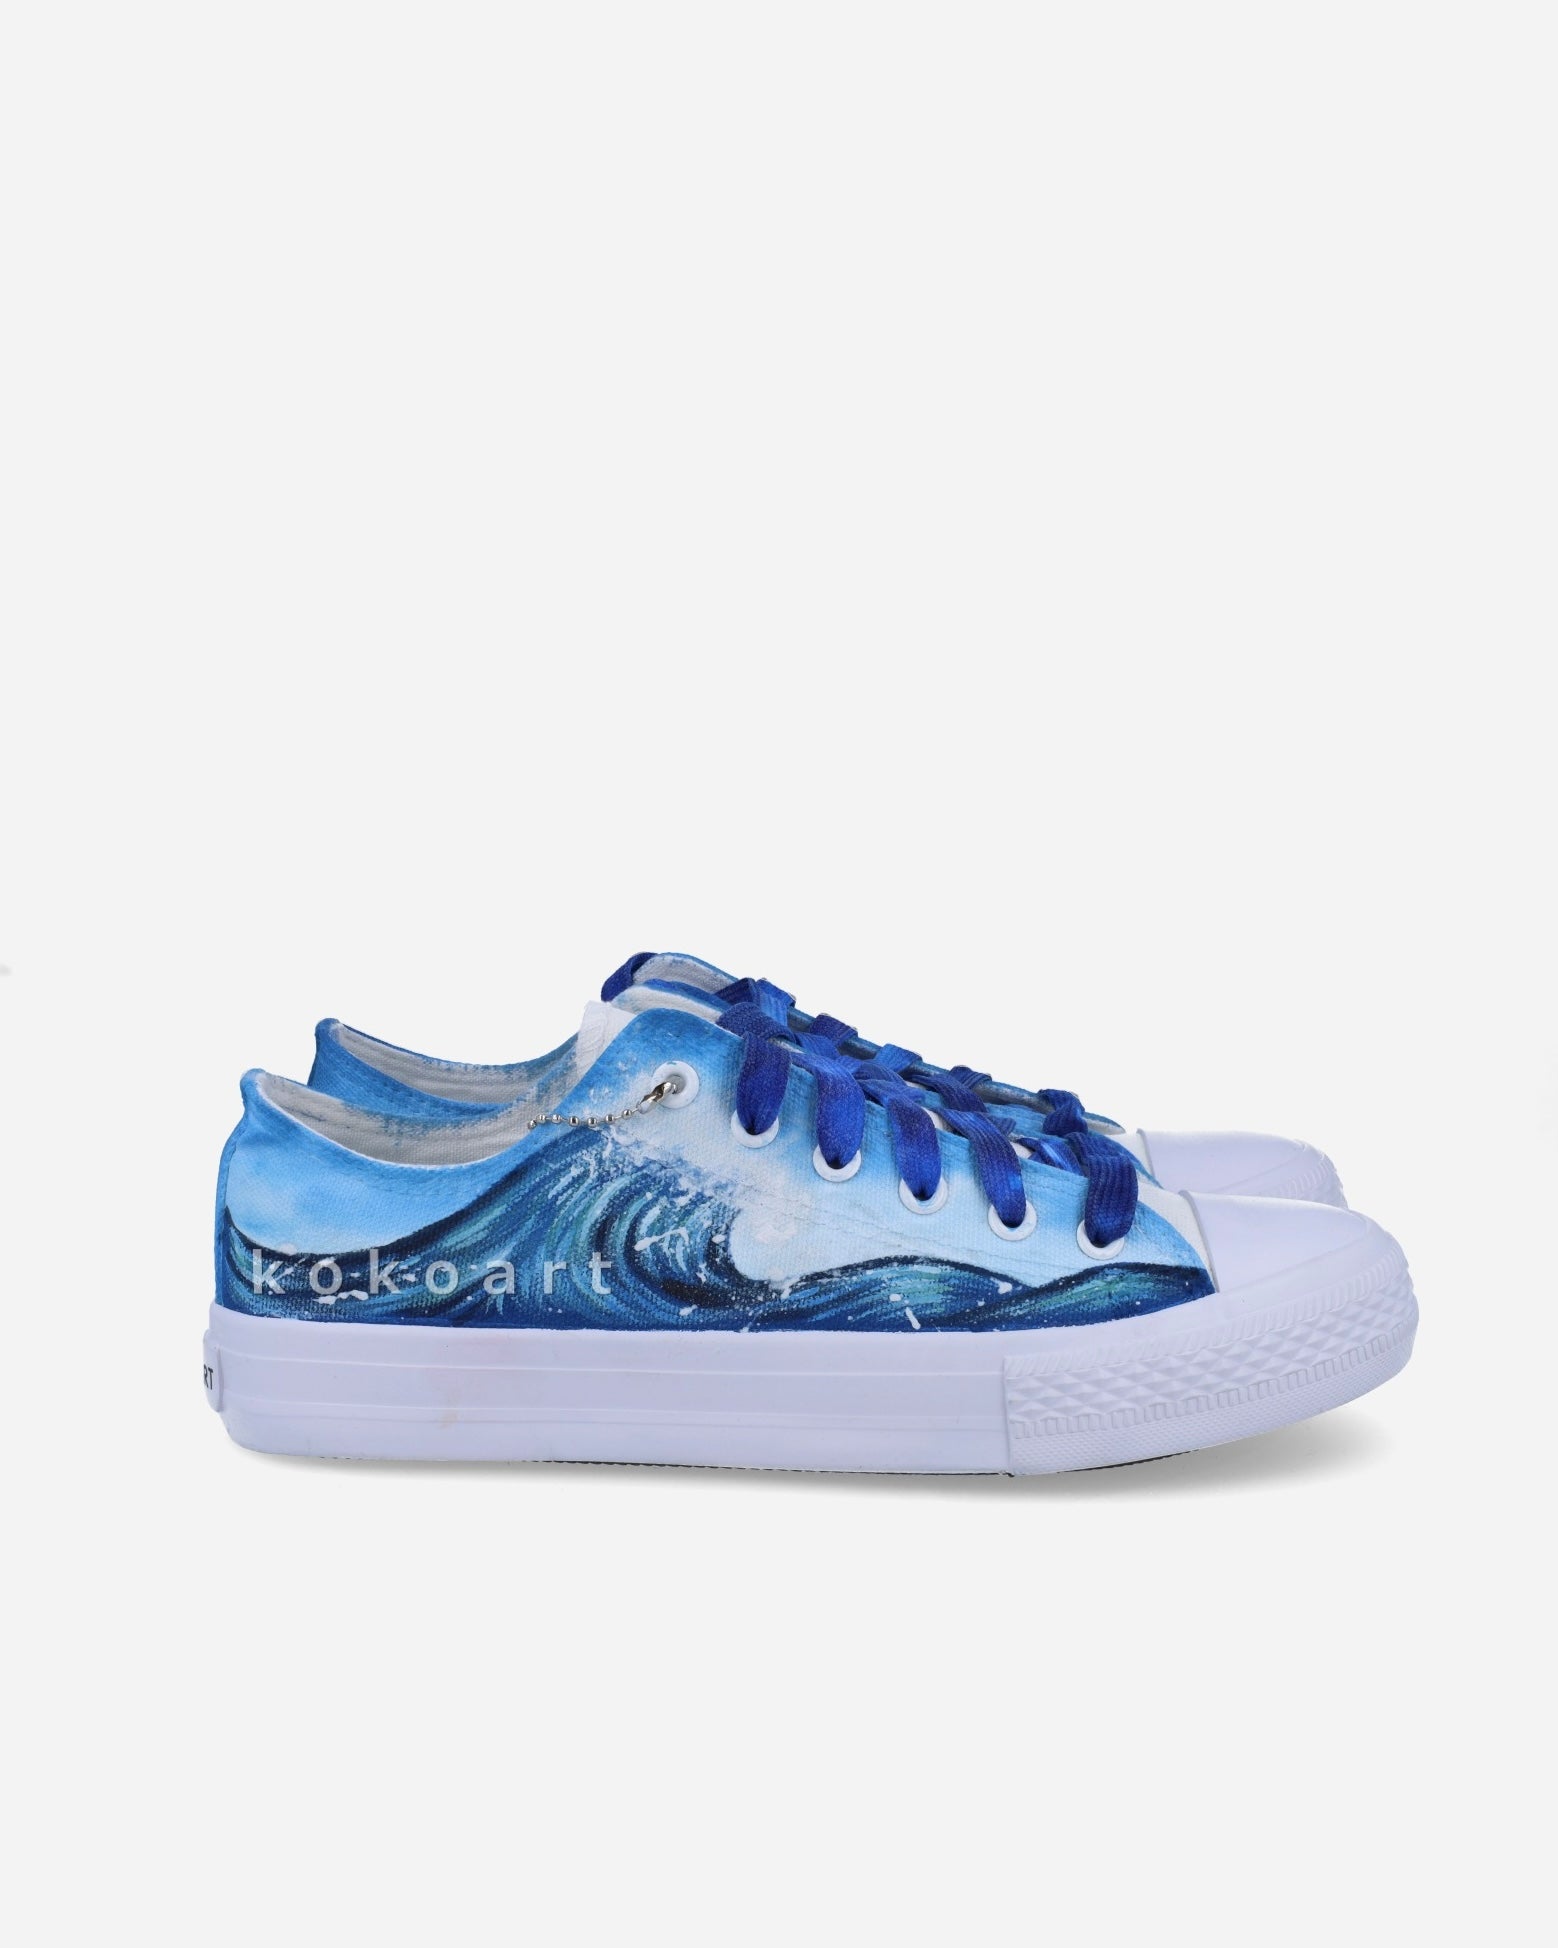 Waves Hand Painted Shoes